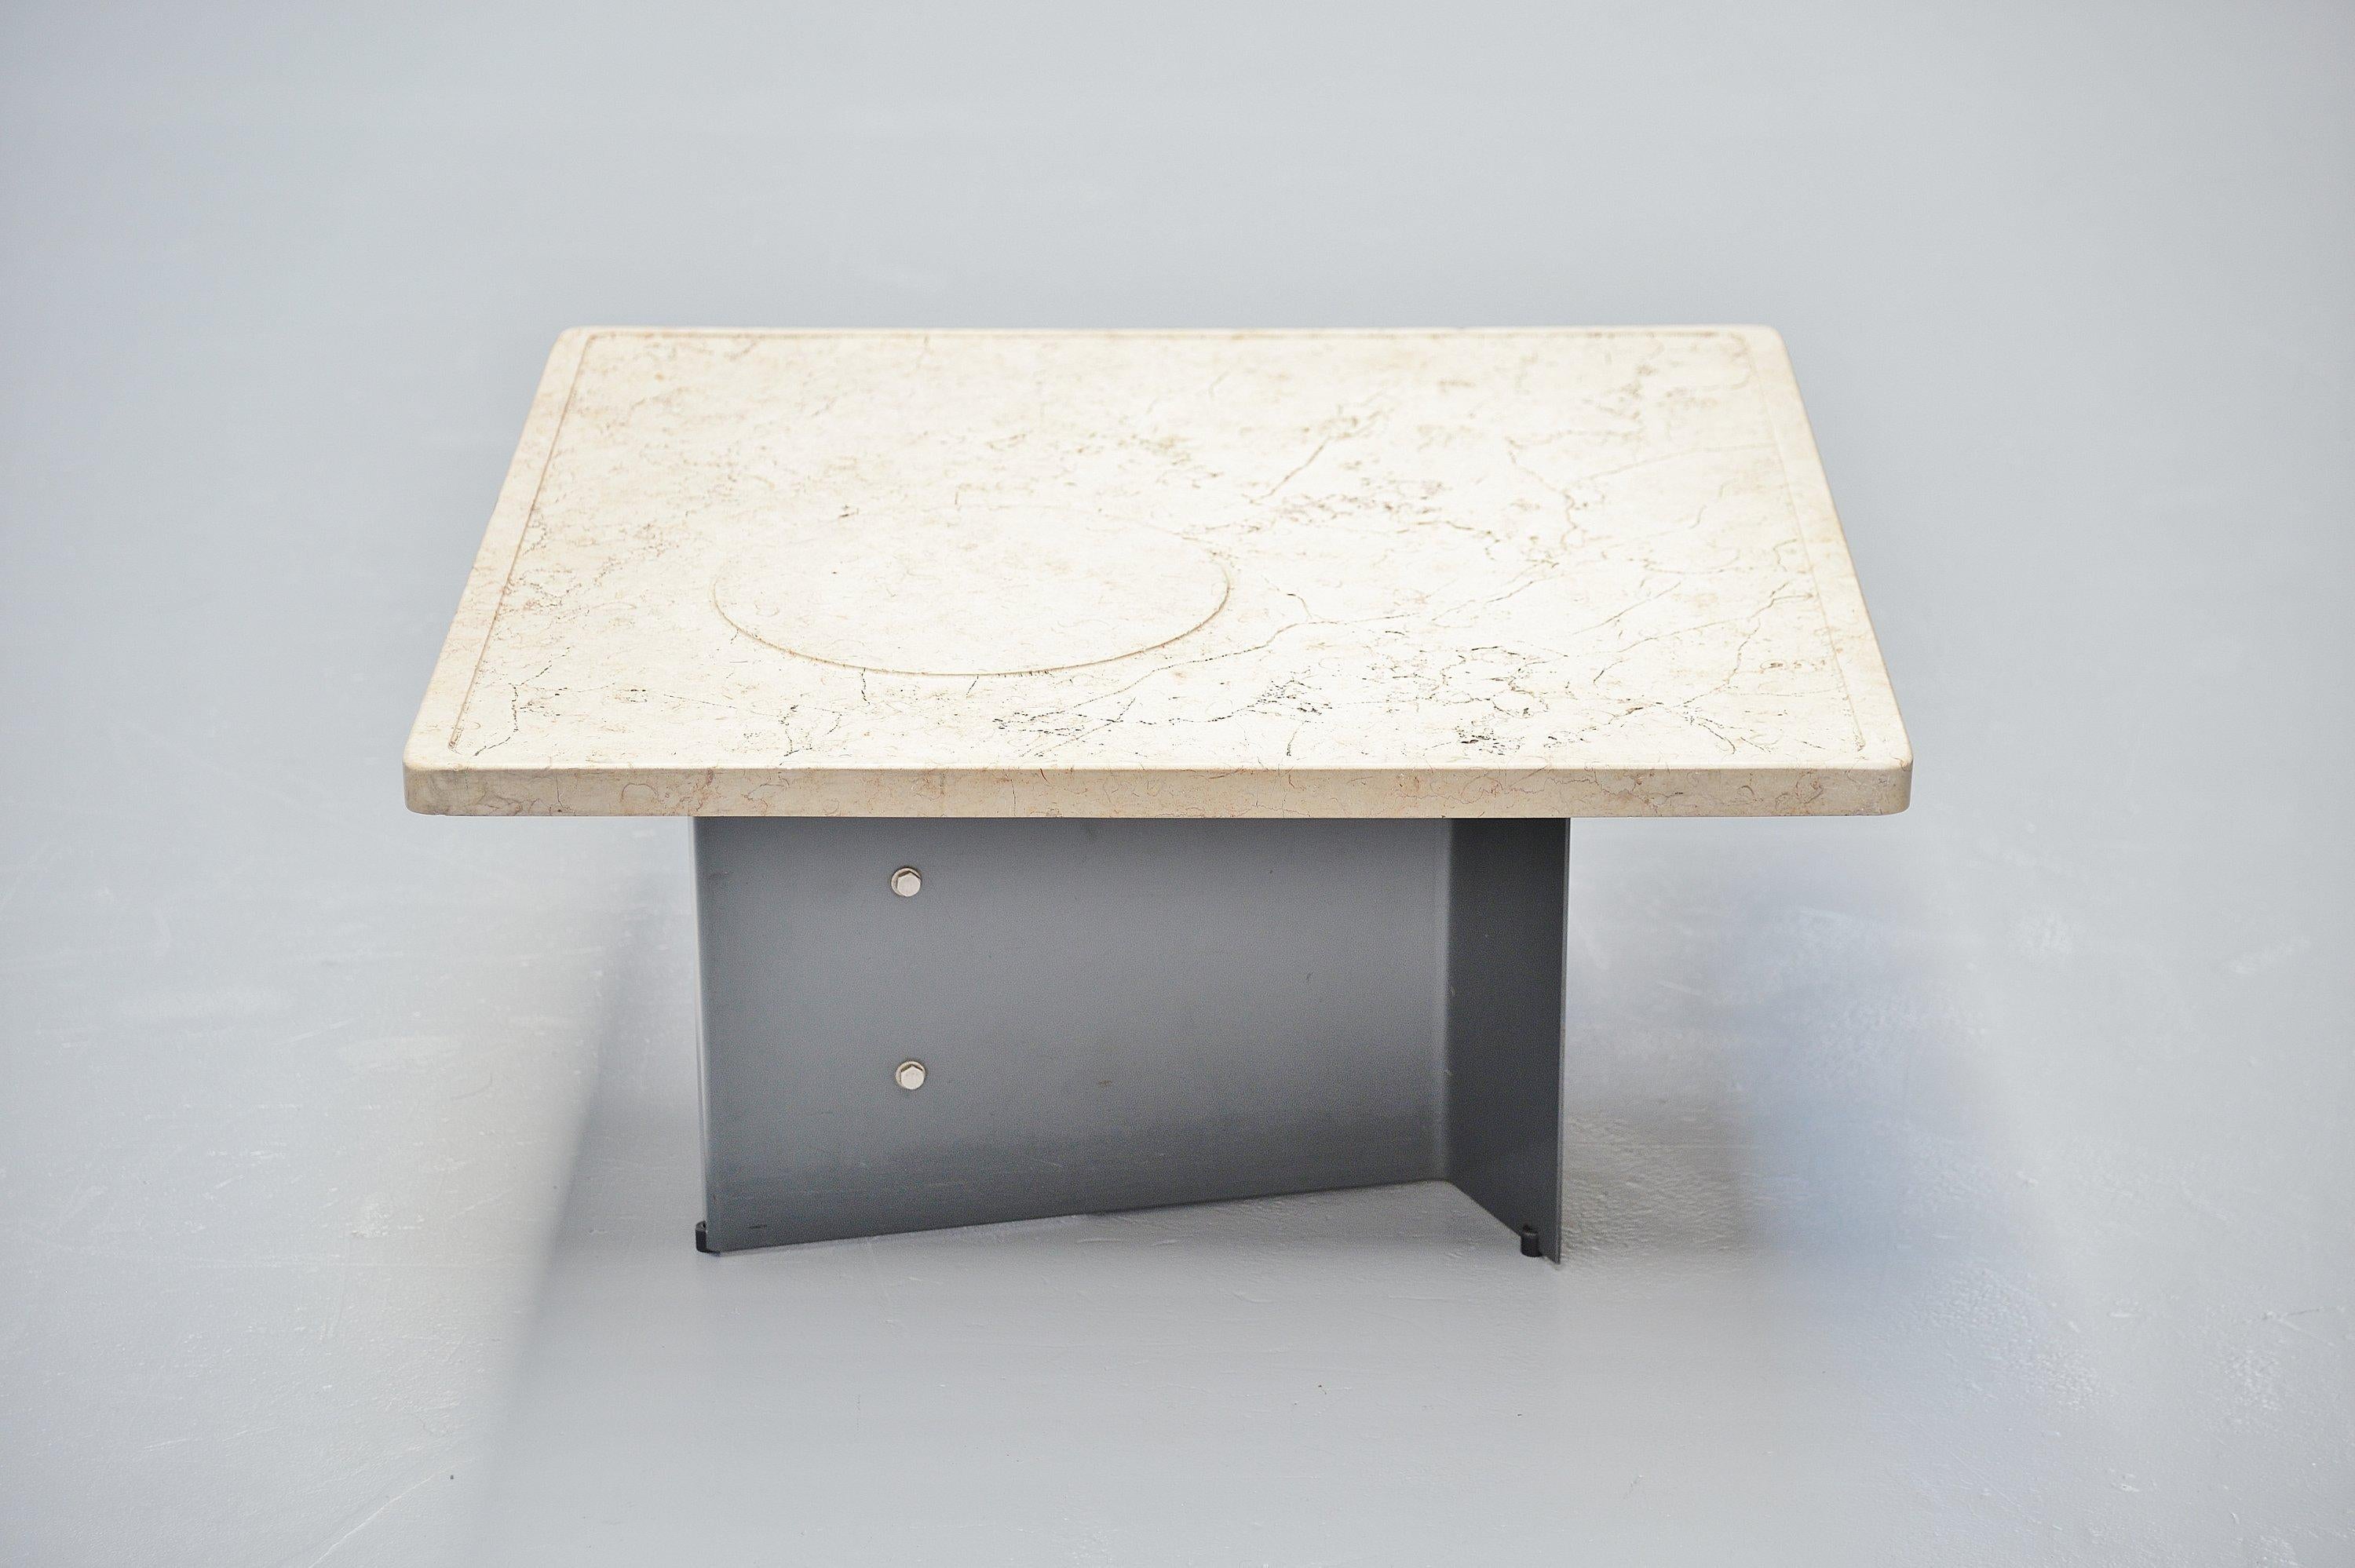 Sculptural coffee table designed by designer duo Giuseppe Nerone and Gianni Patuzzi. Manufactured by Gruppo NP2, Italy, 1966. This is for an early work by NP2, the table has a roman travertine top and a dark grey painted metal base which has a very